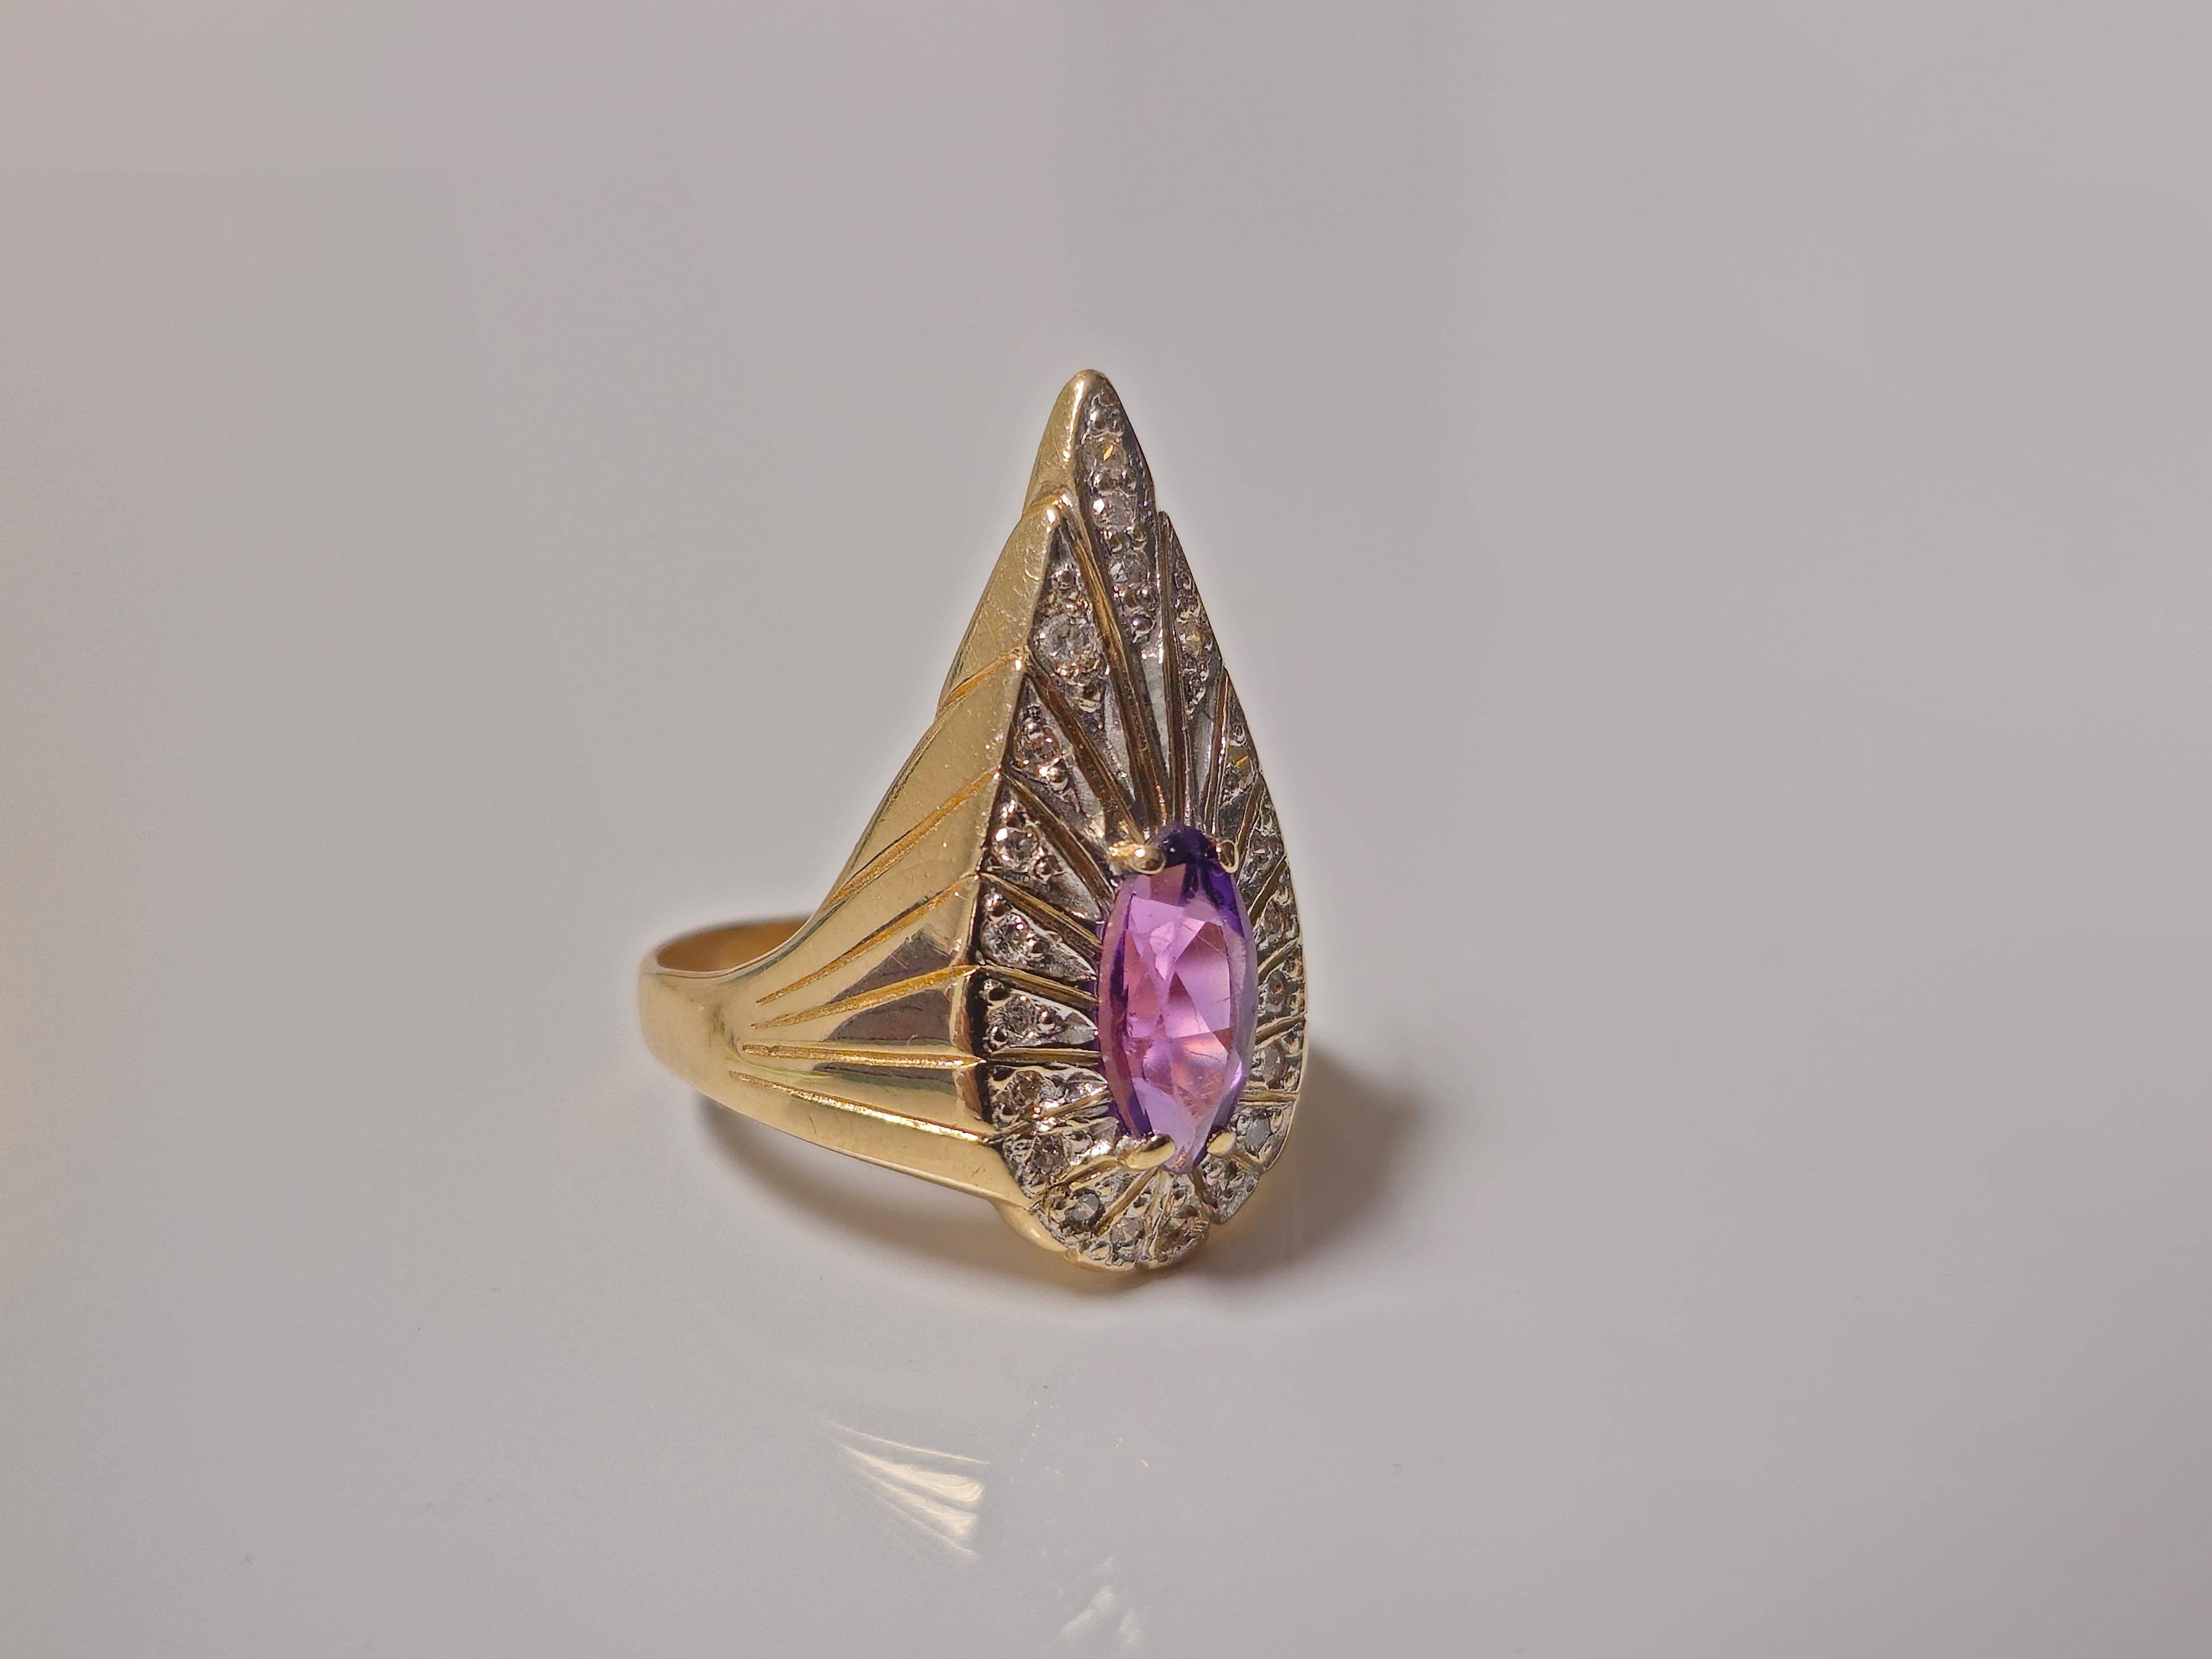 This 14k gold ring weighs 5.85 grams and features a marquise-shaped 0.50-carat amethyst complemented by 0.50 carats of diamonds with SI clarity and G color. Sized at US 7, it's a striking combination of amethyst and diamonds.

Key Features:

14k.